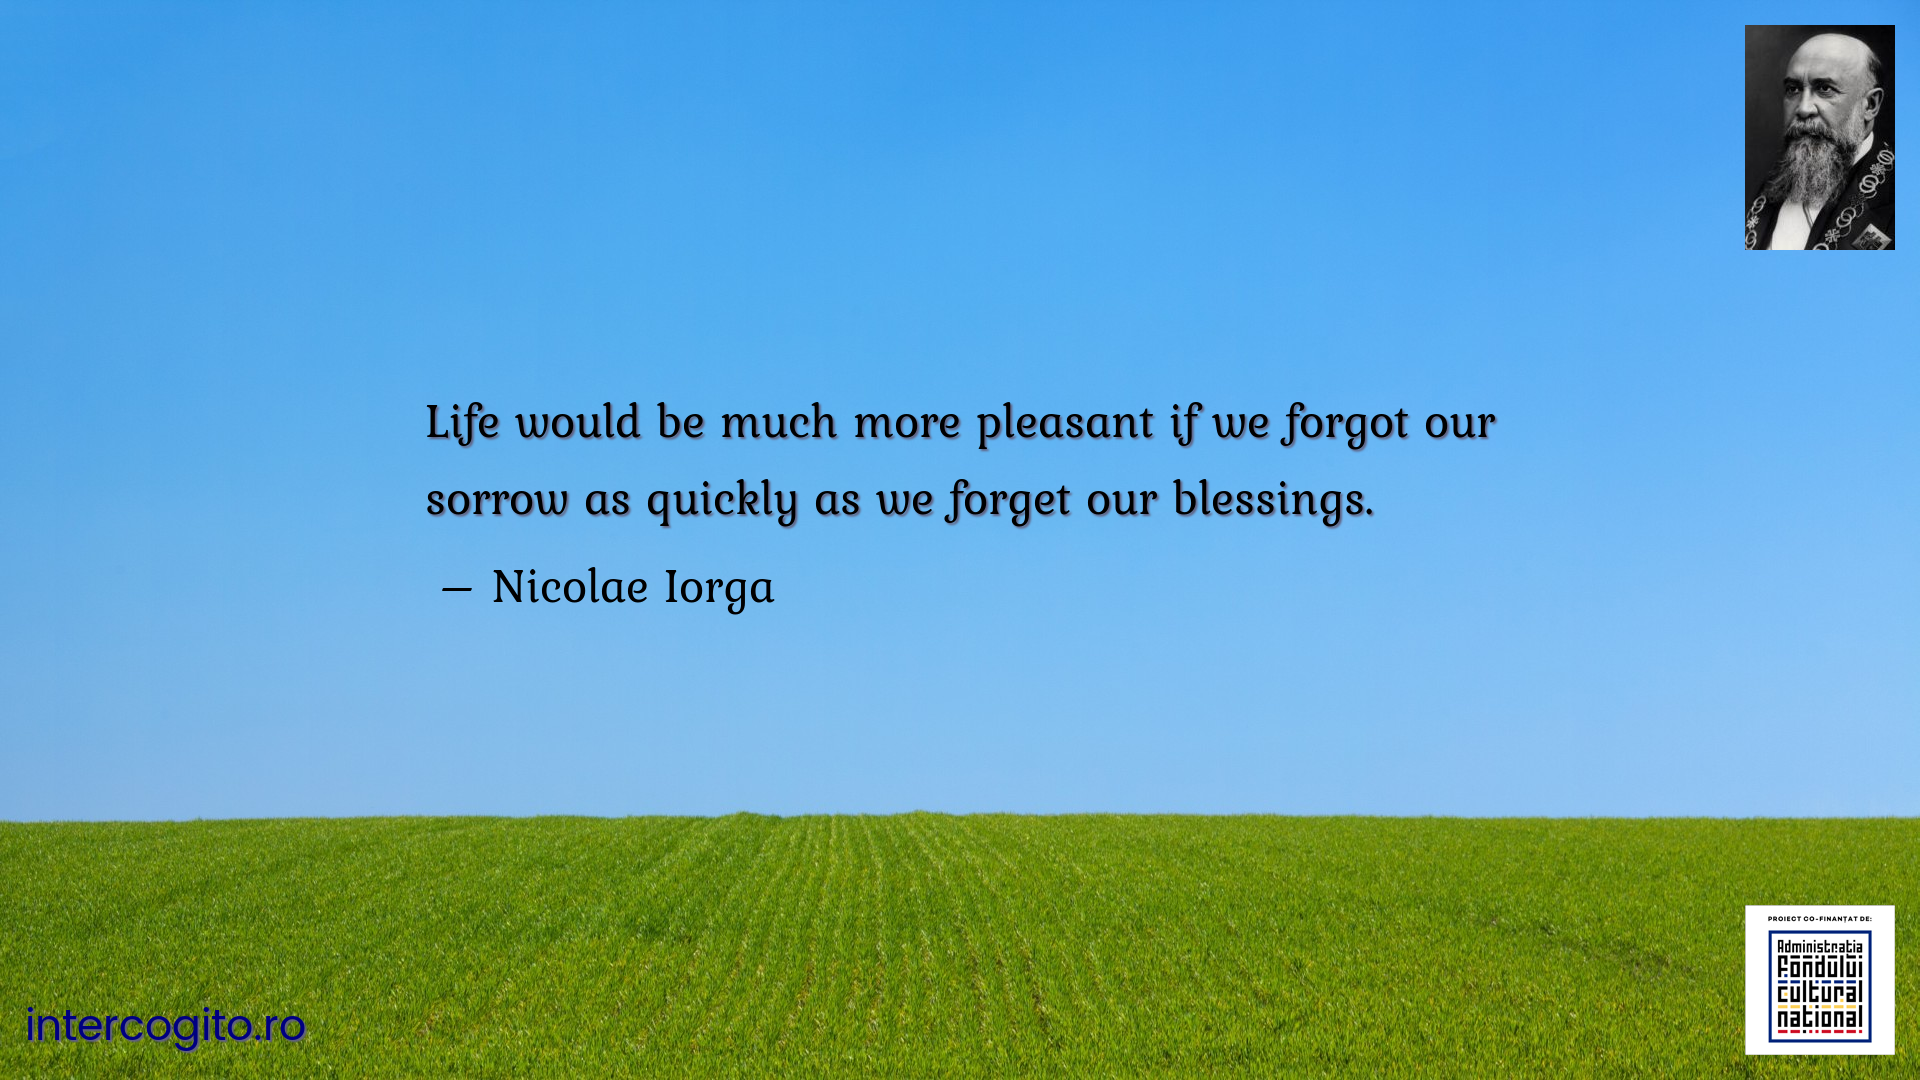 Life would be much more pleasant if we forgot our sorrow as quickly as we forget our blessings.